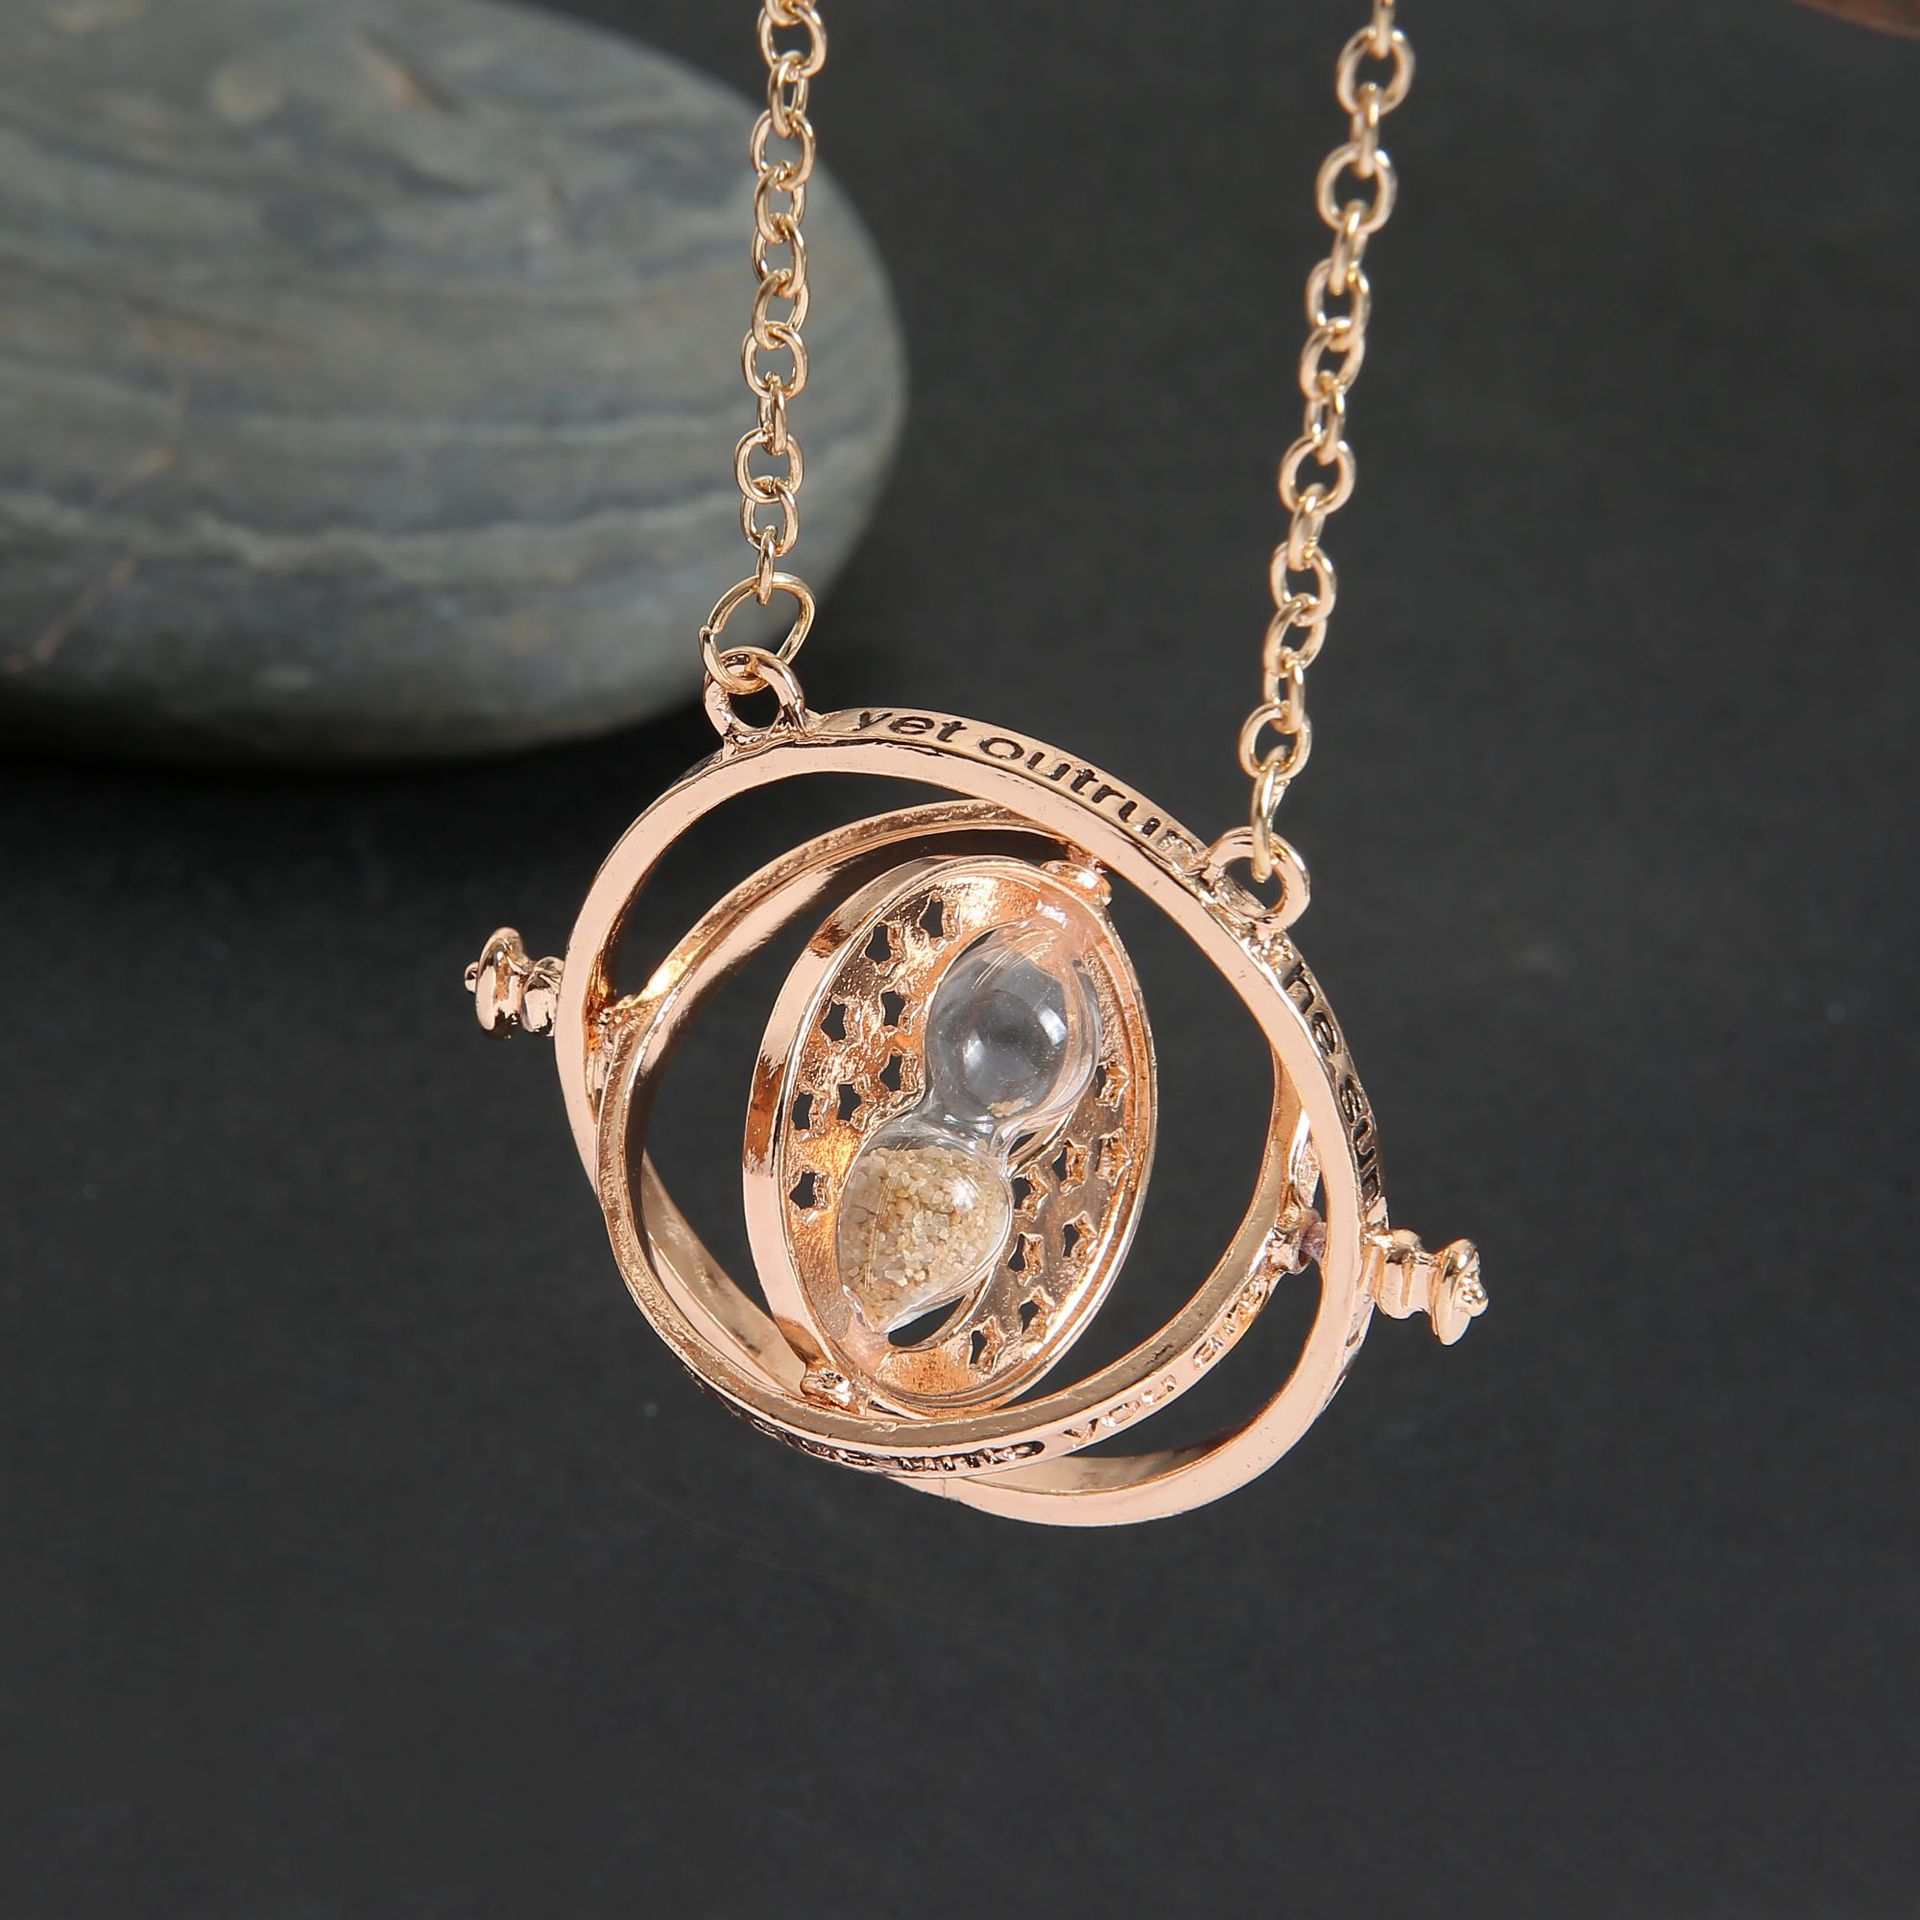 Hermione Time-Turner Necklace - Harry Potter. 24hr Delivery | Funidelia